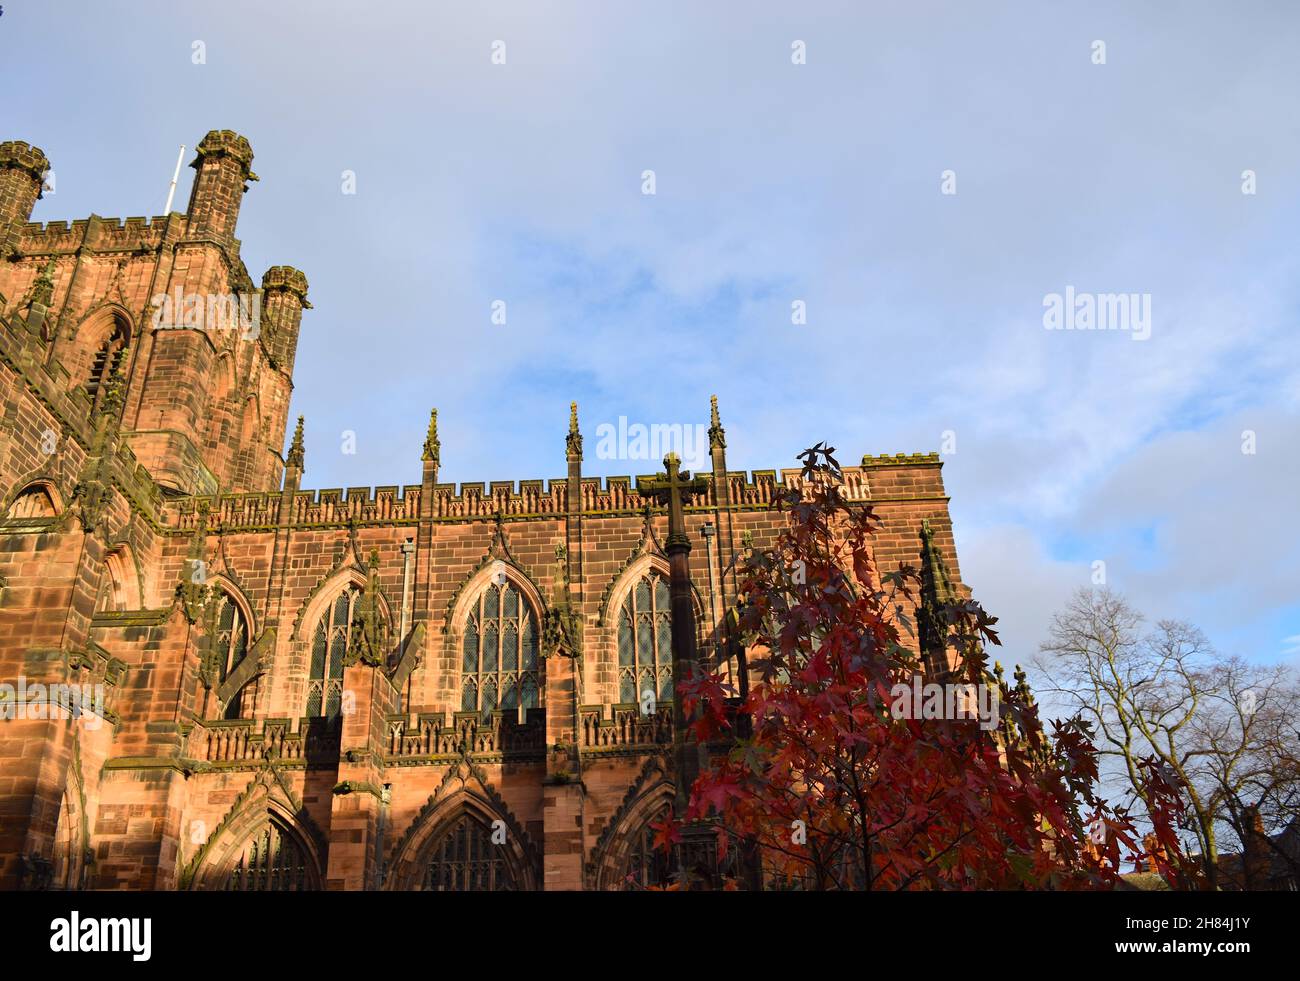 Magnificent Chester cathedral on blue sky background. Stock Photo